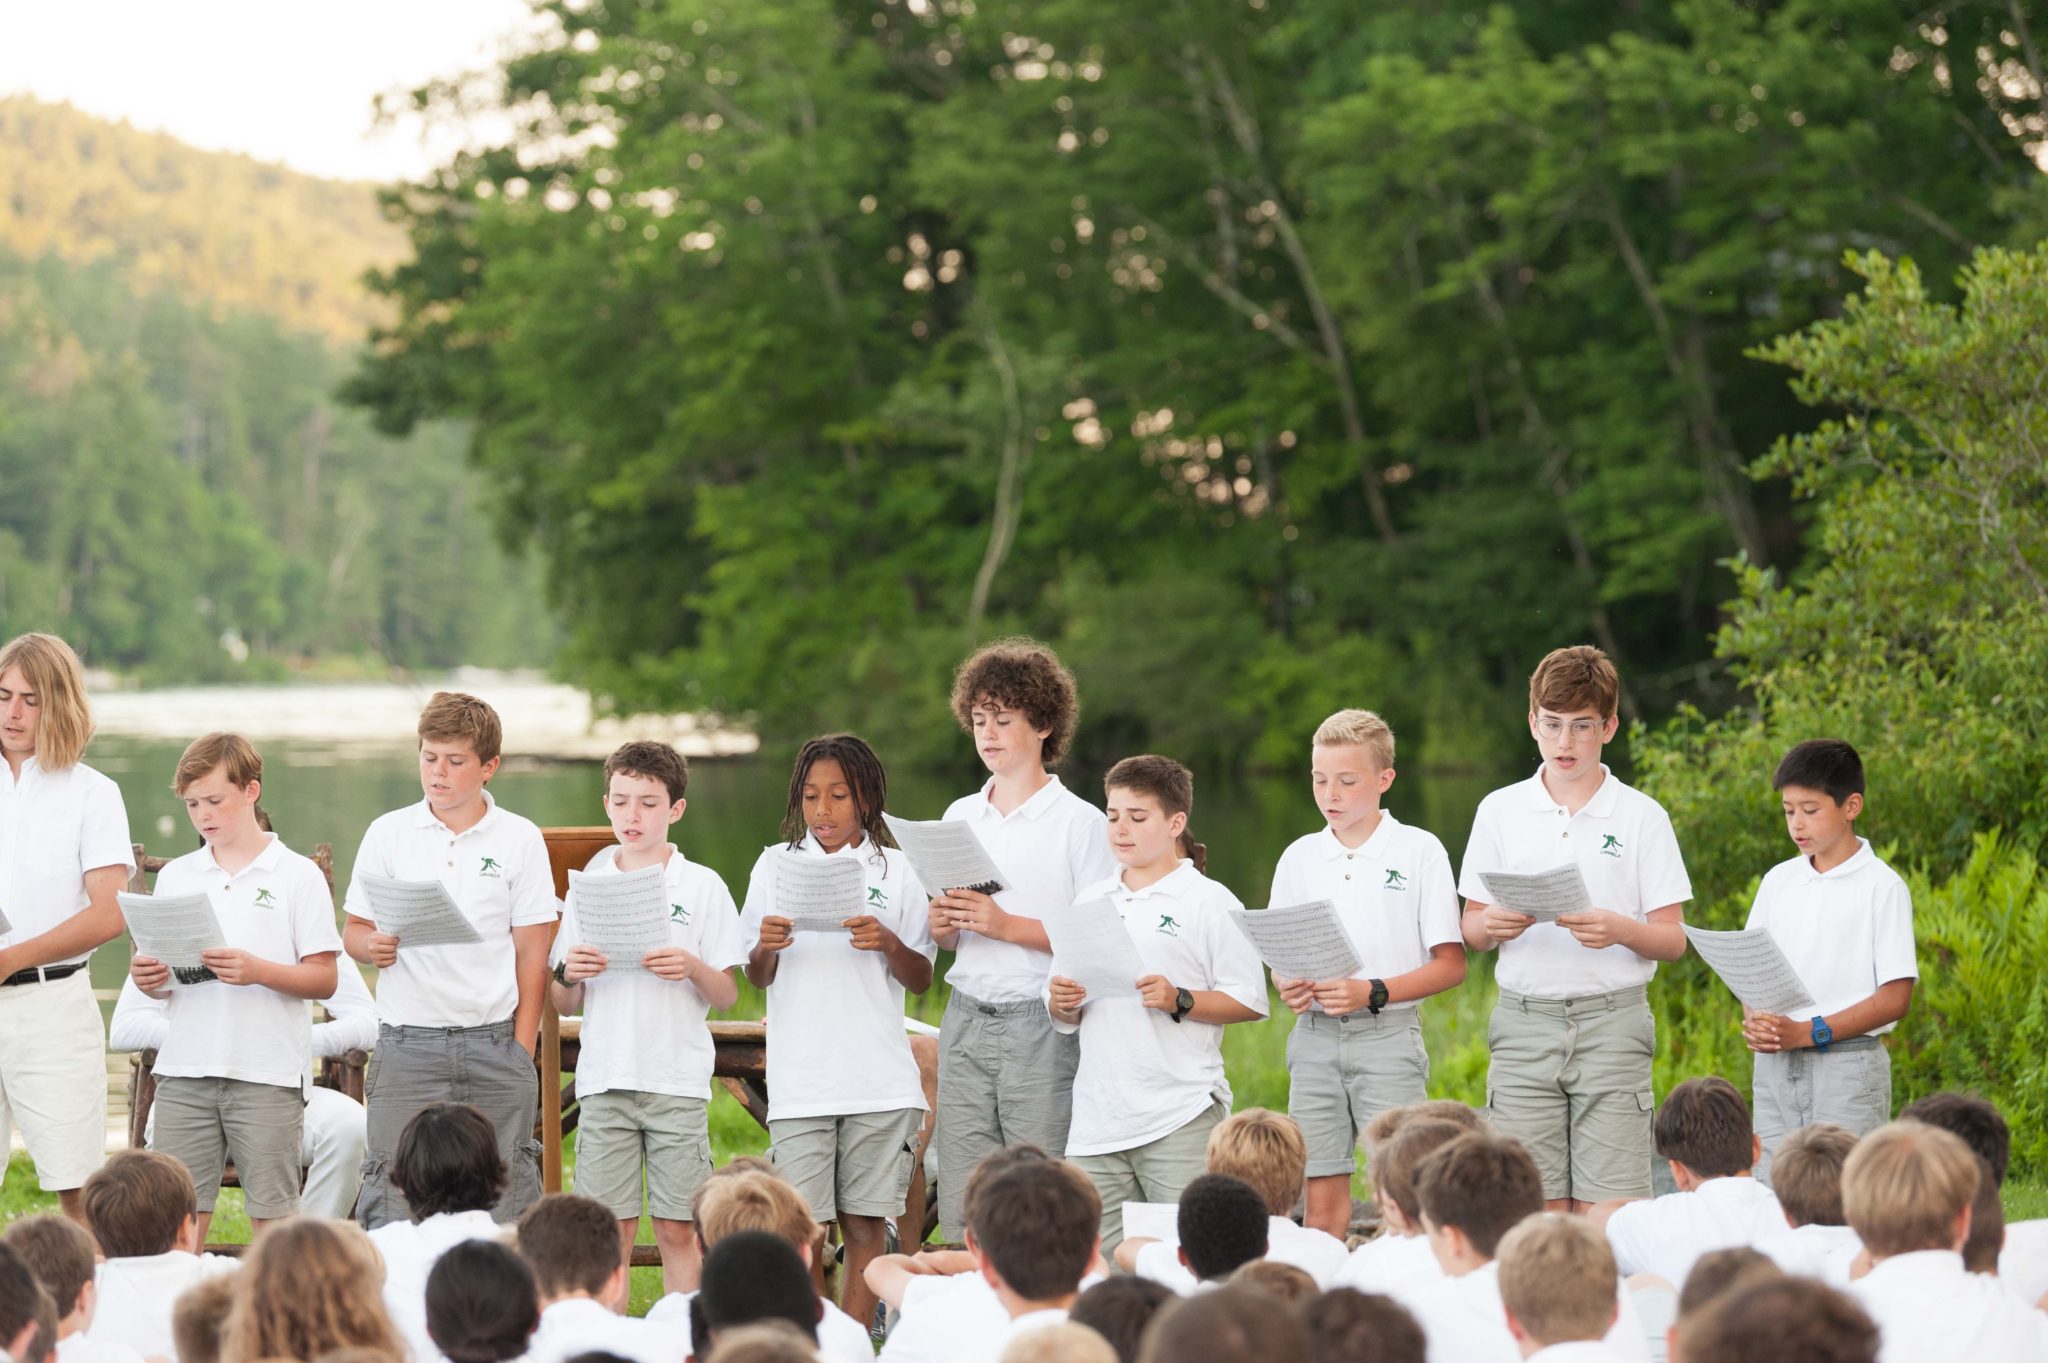 A group of campers at Lanakila singing at Lanakila during an outdoor assembly.